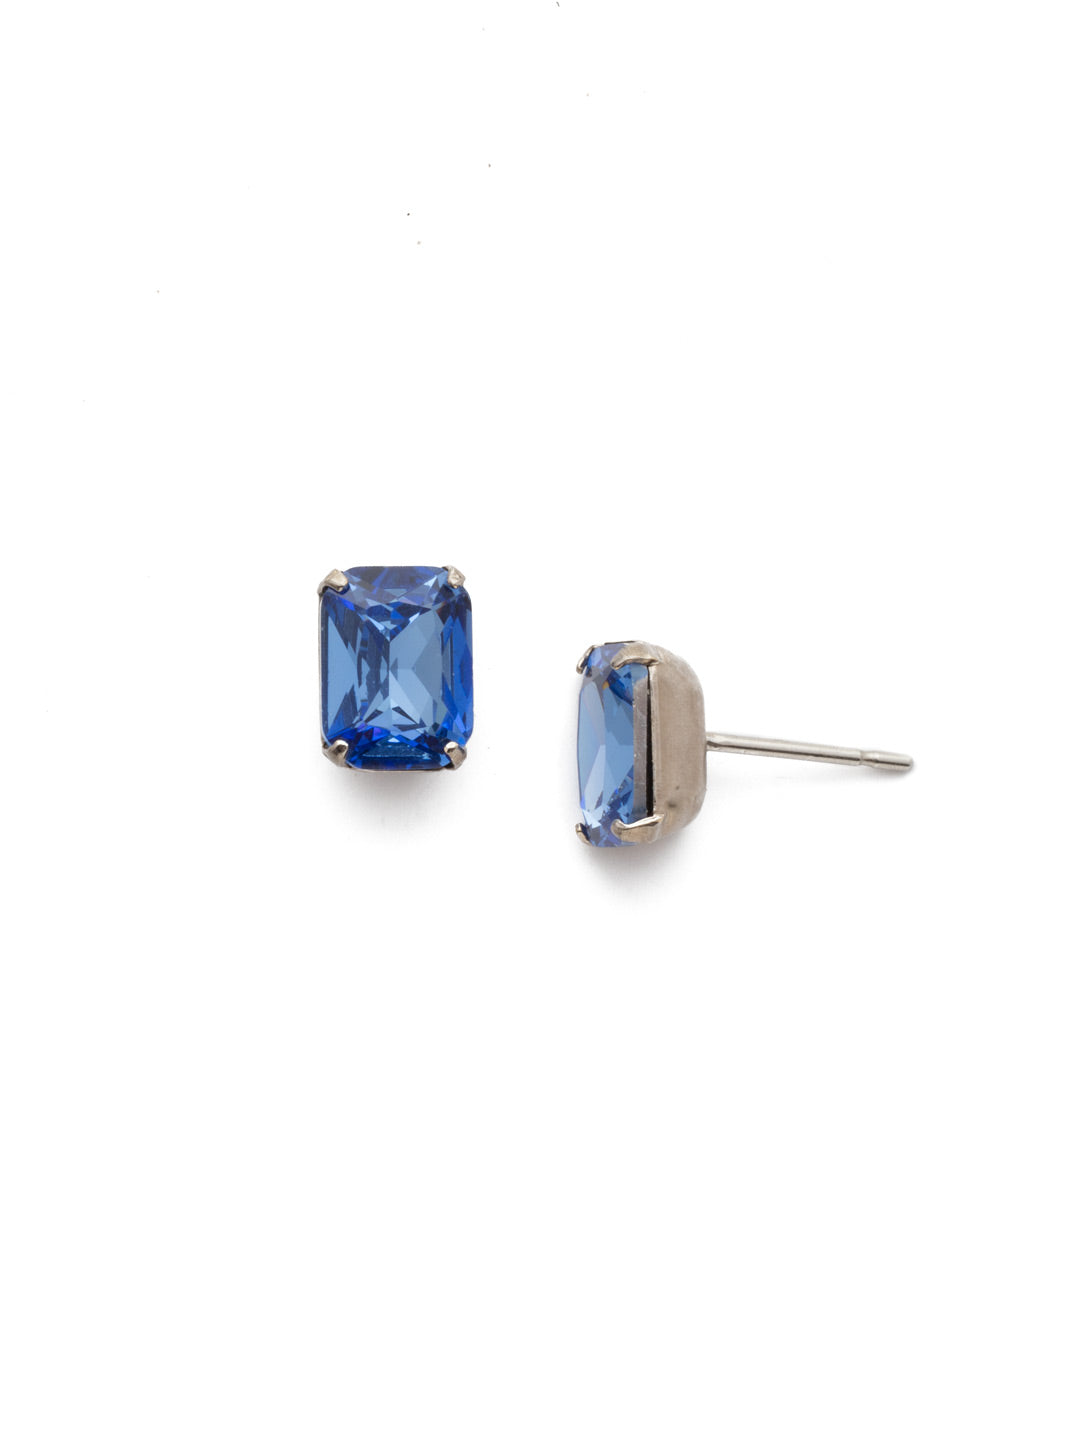 Mini Emerald Cut Stud Earrings - EBY42ASSAP - <p>Simply sophisticated. The mini emerald cut stud earrings can be worn alone or paired with anything for an extra accent to any wardrobe. From Sorrelli's Sapphire collection in our Antique Silver-tone finish.</p>